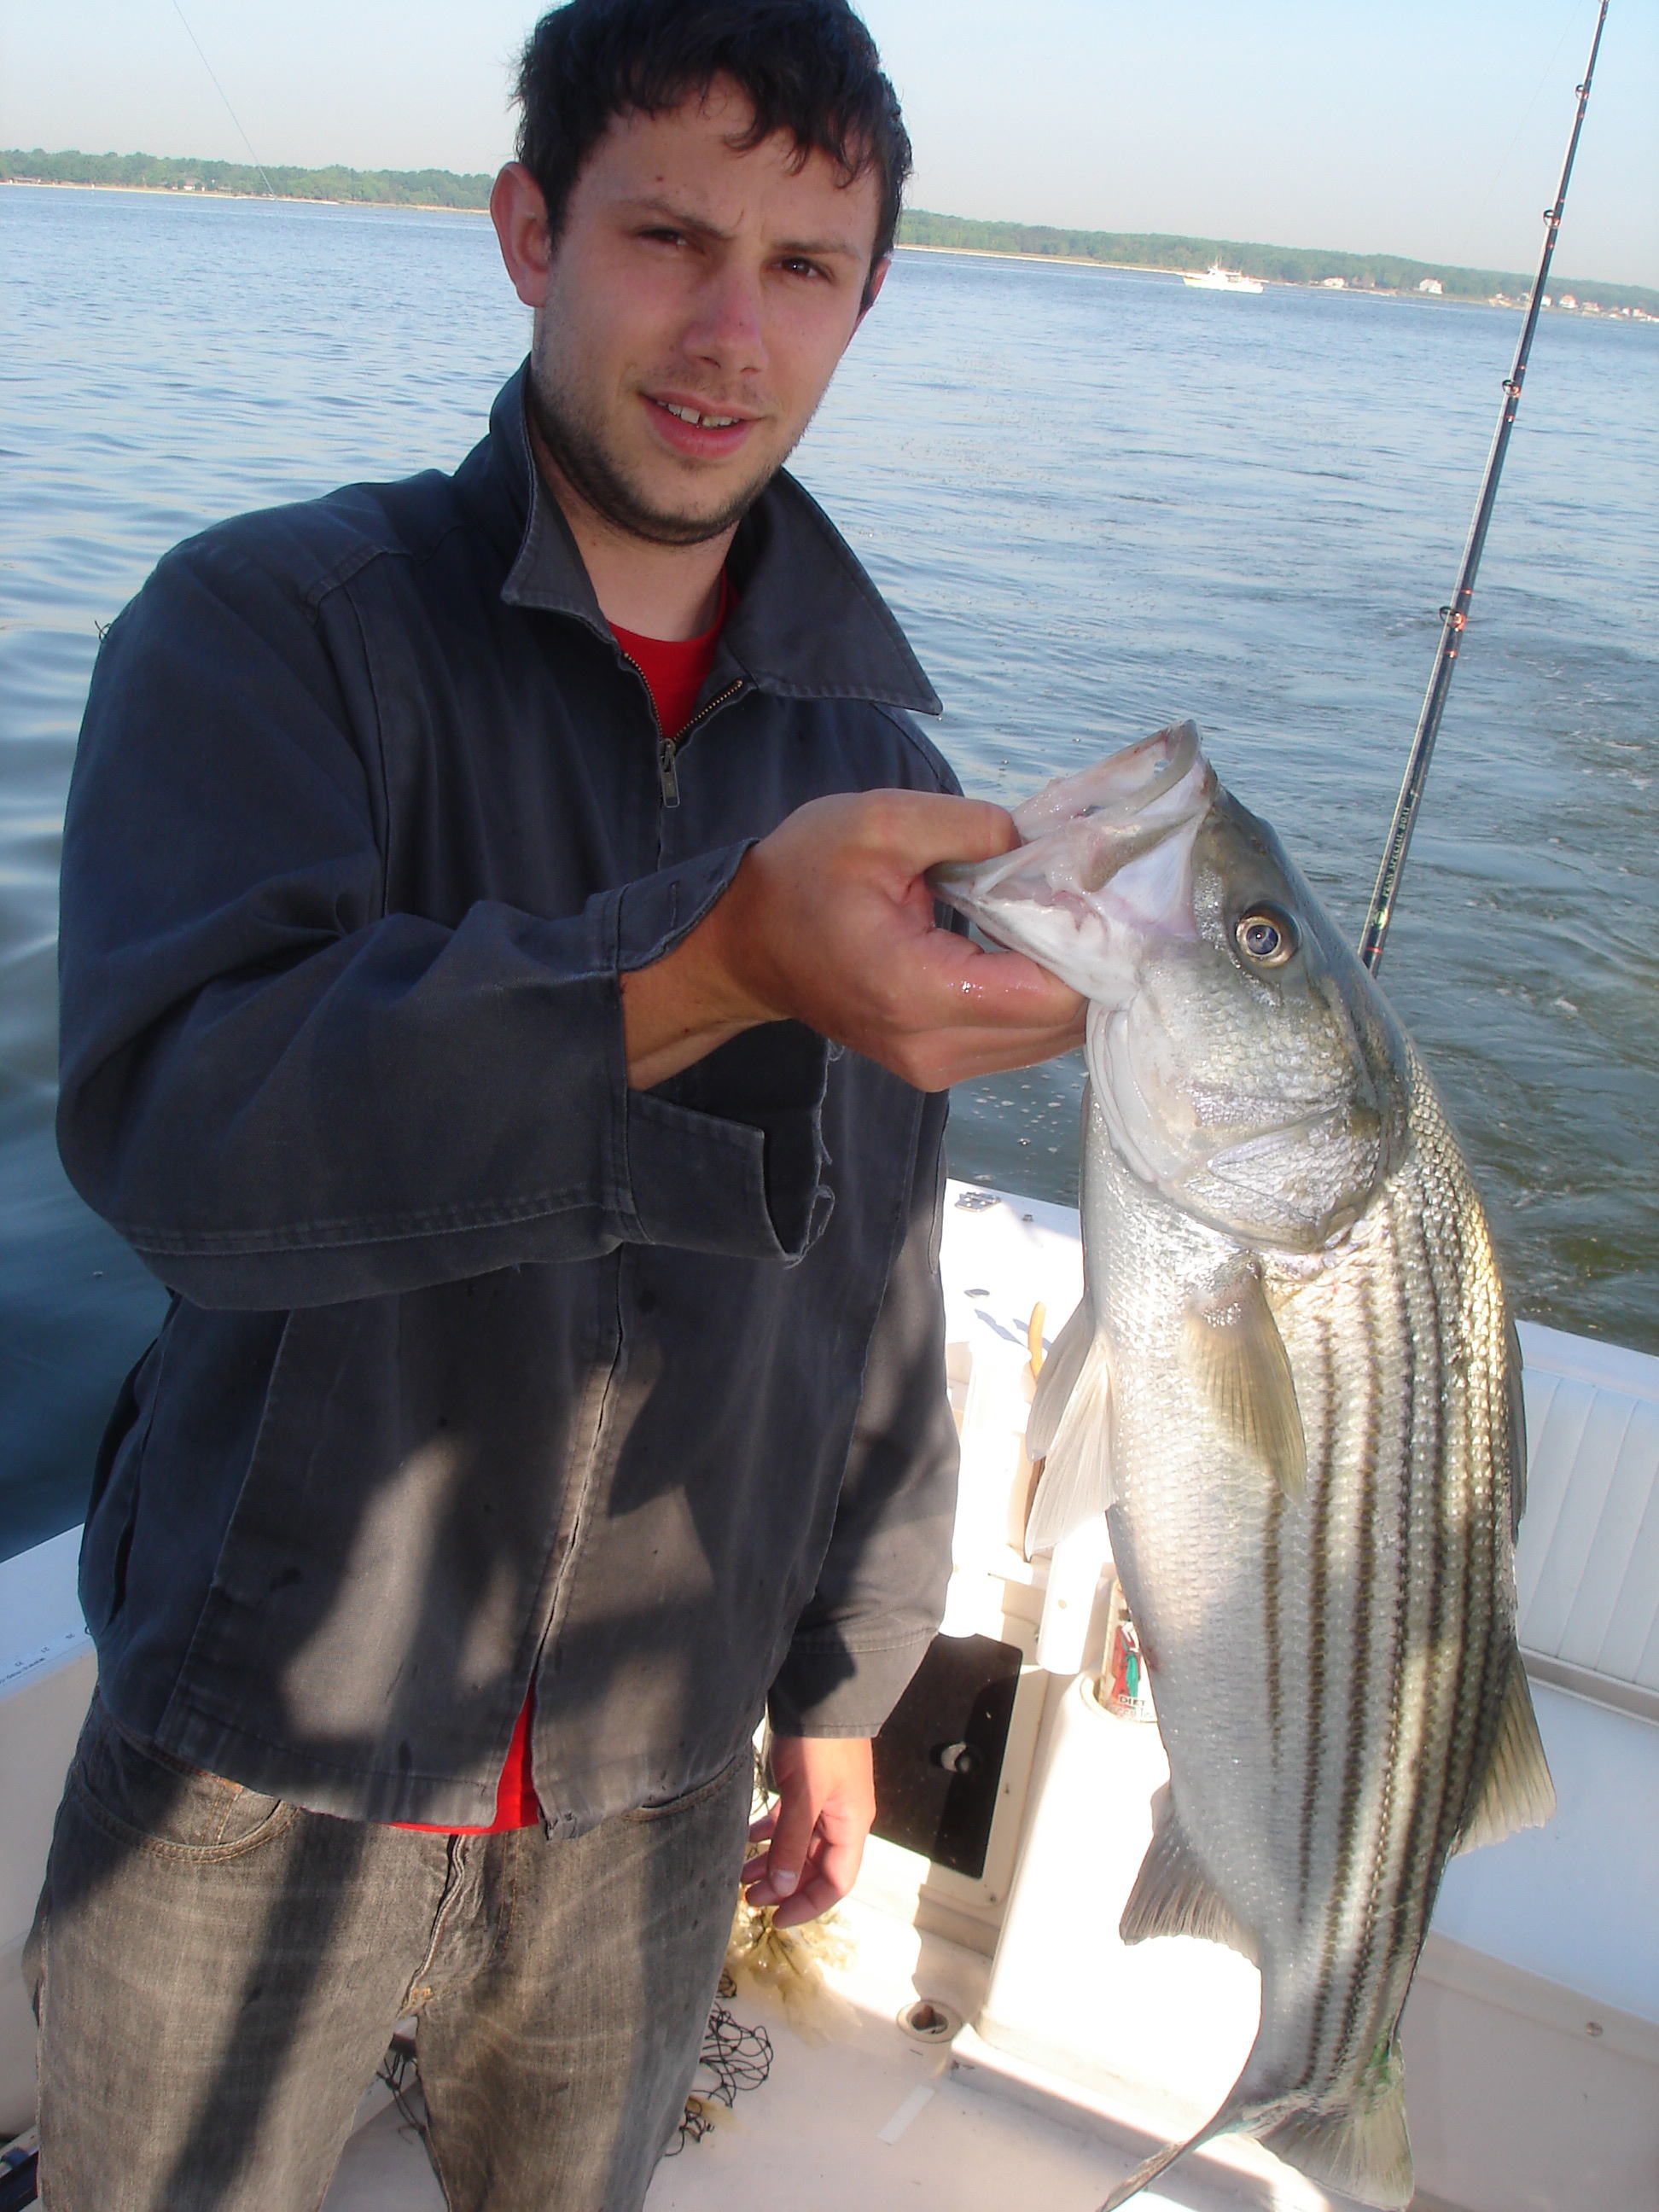 5/22/07 - Dyson Charter - Jigging on some nice stripers